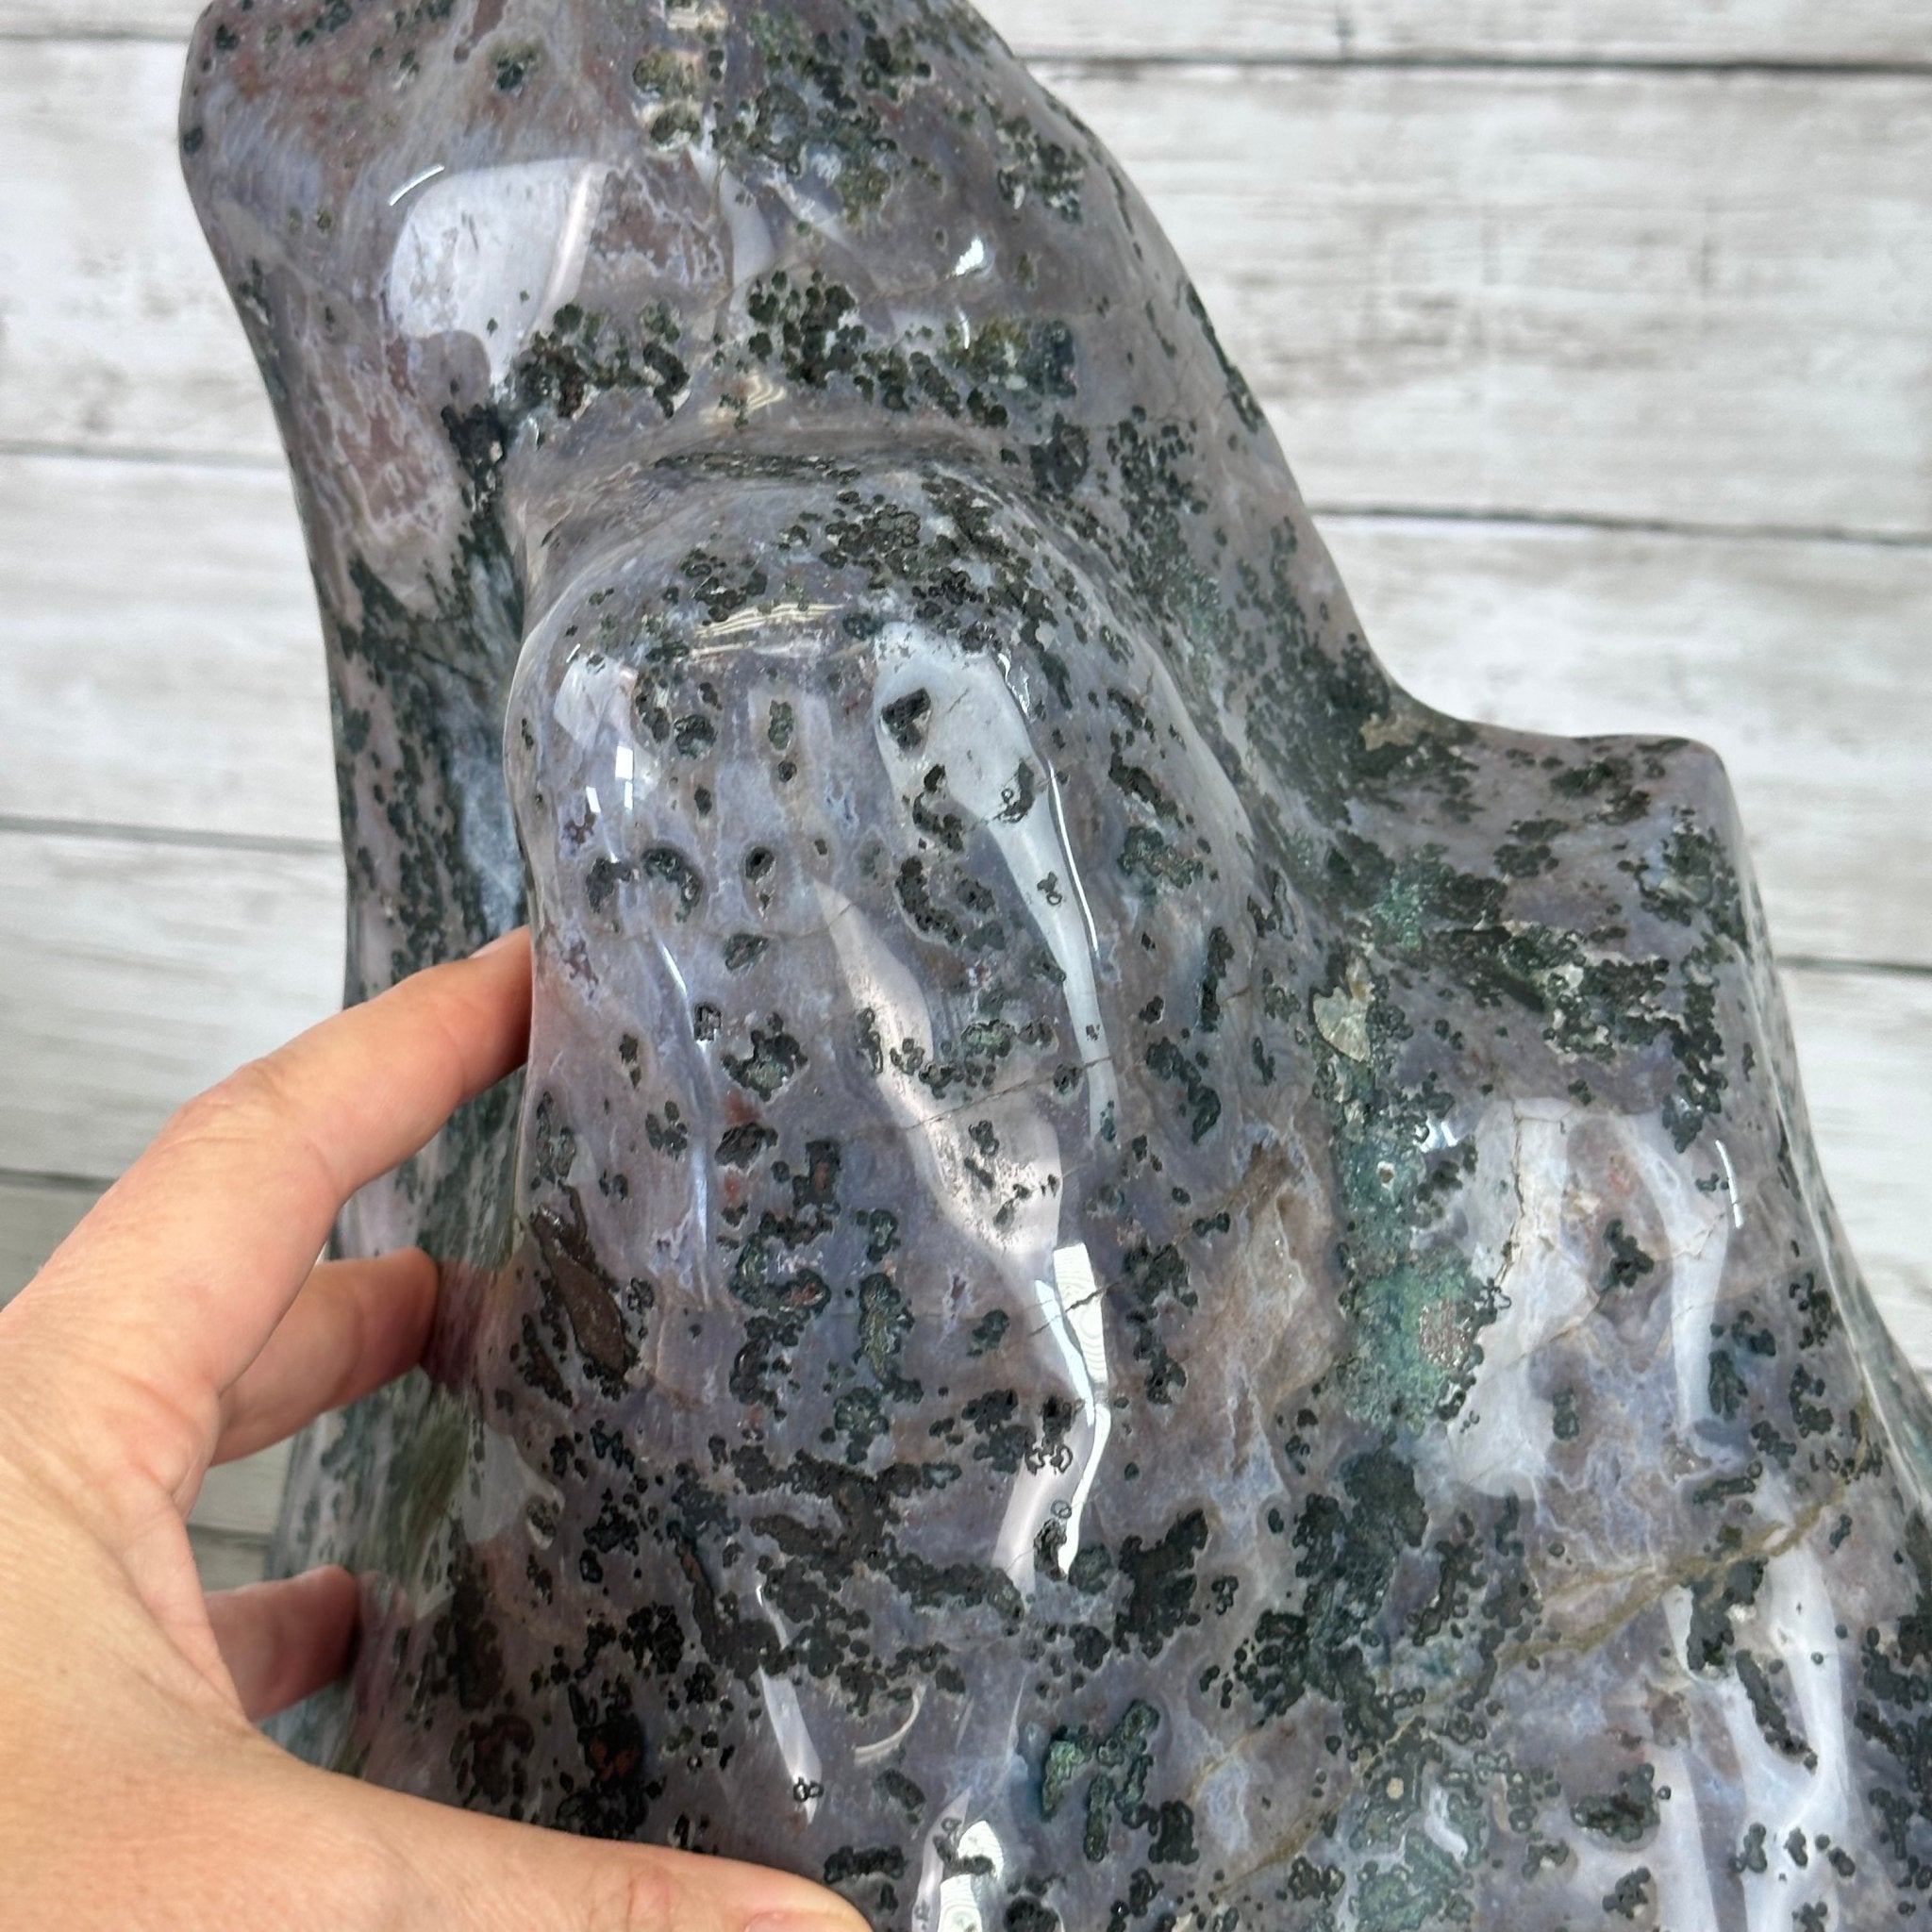 Super Quality Polished Brazilian Amethyst Cathedral, 140.1 lbs & 24.6" tall Model #5602-0201 by Brazil Gems - Brazil GemsBrazil GemsSuper Quality Polished Brazilian Amethyst Cathedral, 140.1 lbs & 24.6" tall Model #5602-0201 by Brazil GemsPolished Cathedrals5602-0201